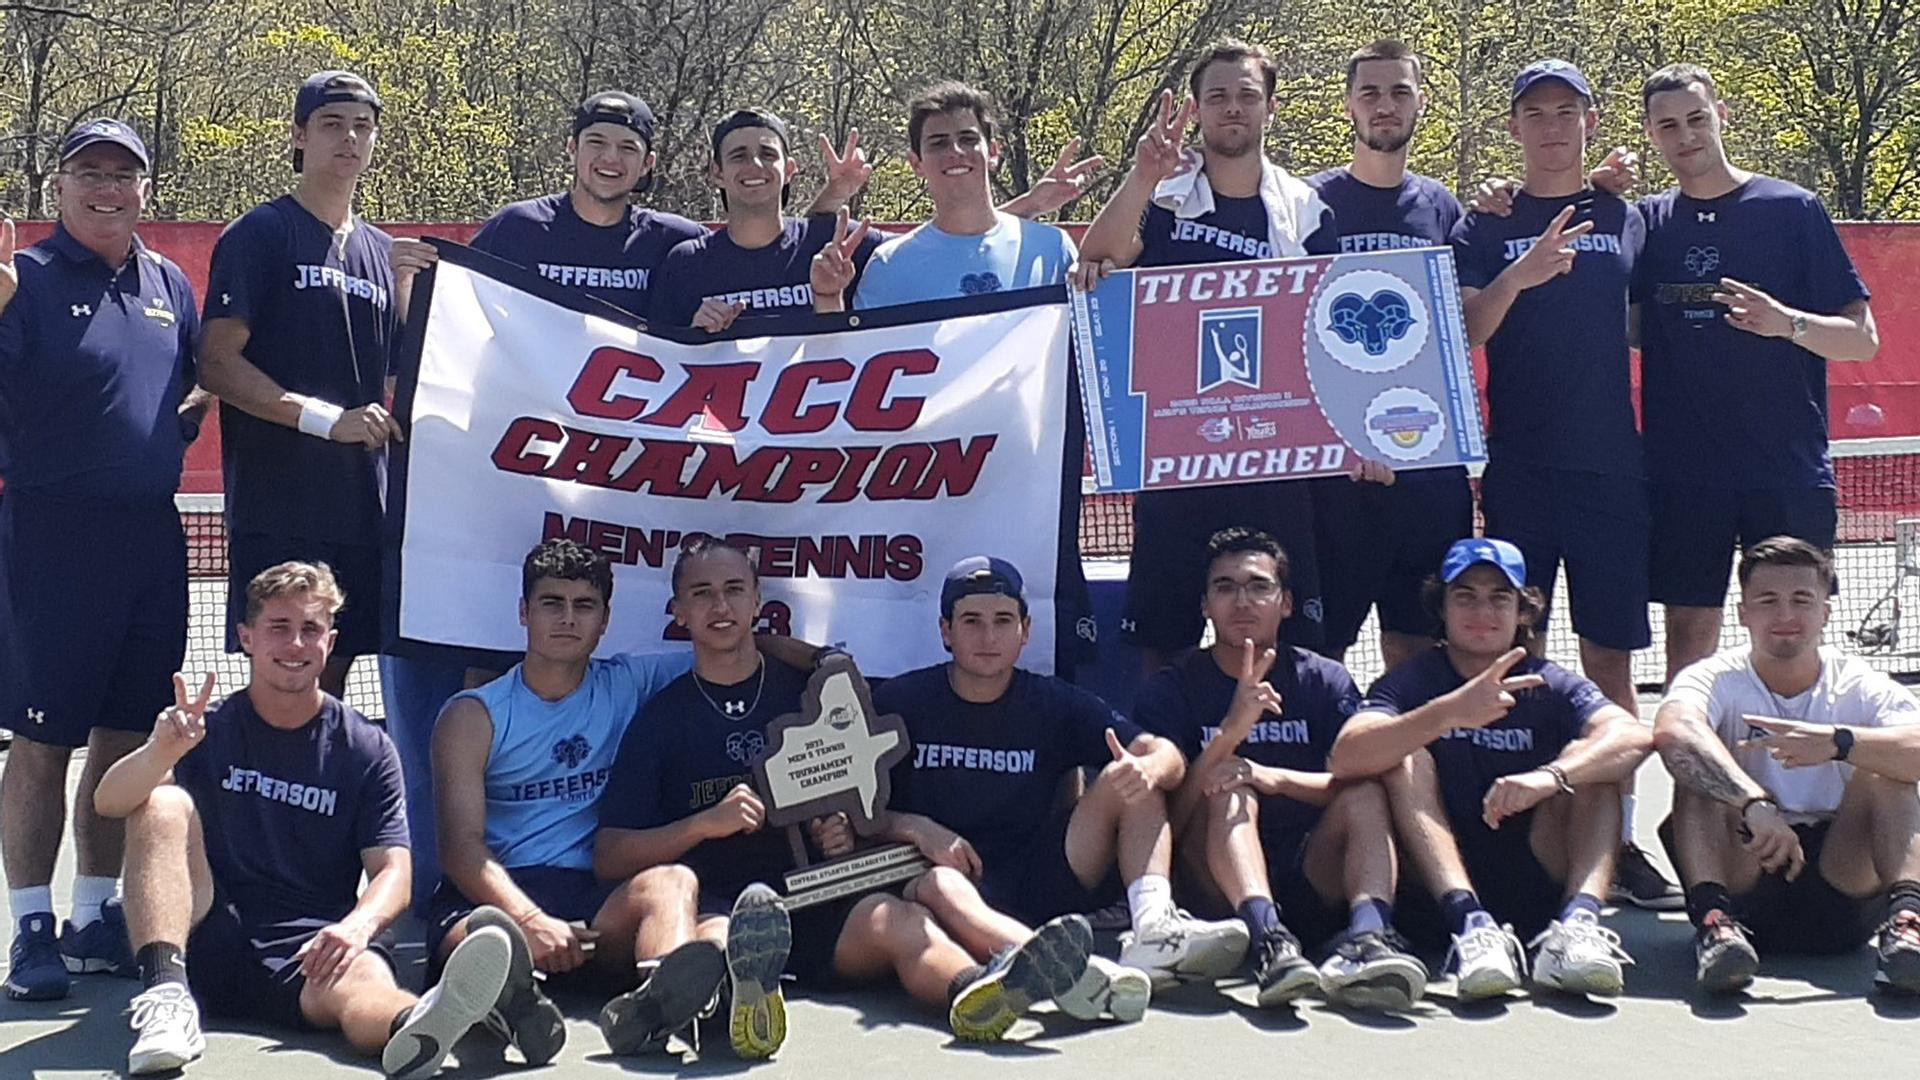 Jefferson Claims 2nd Straight CACC MTEN Championship